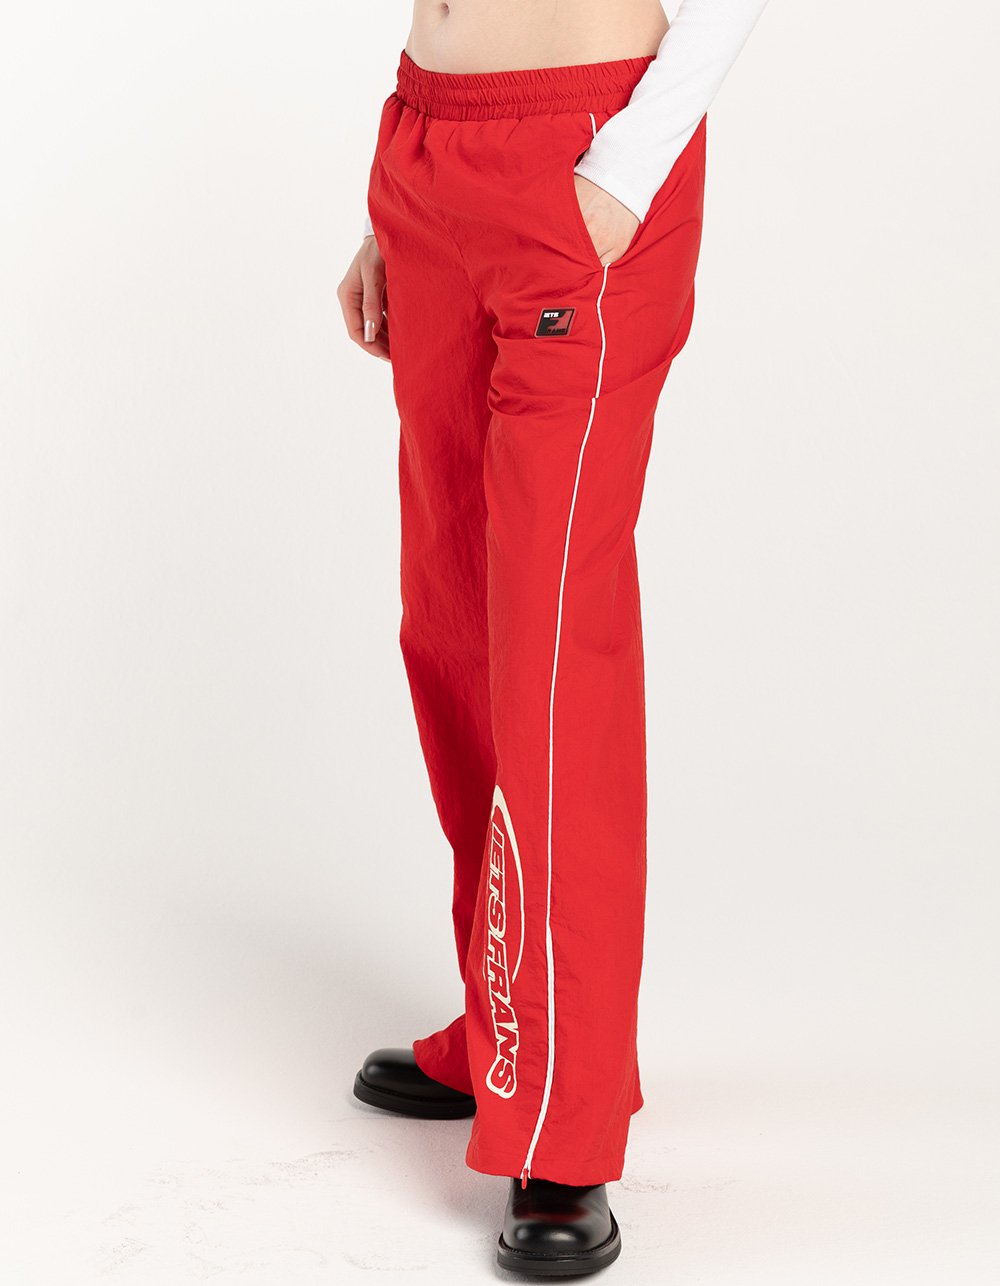 IETS FRANS Icon Womens Track Pants - RED